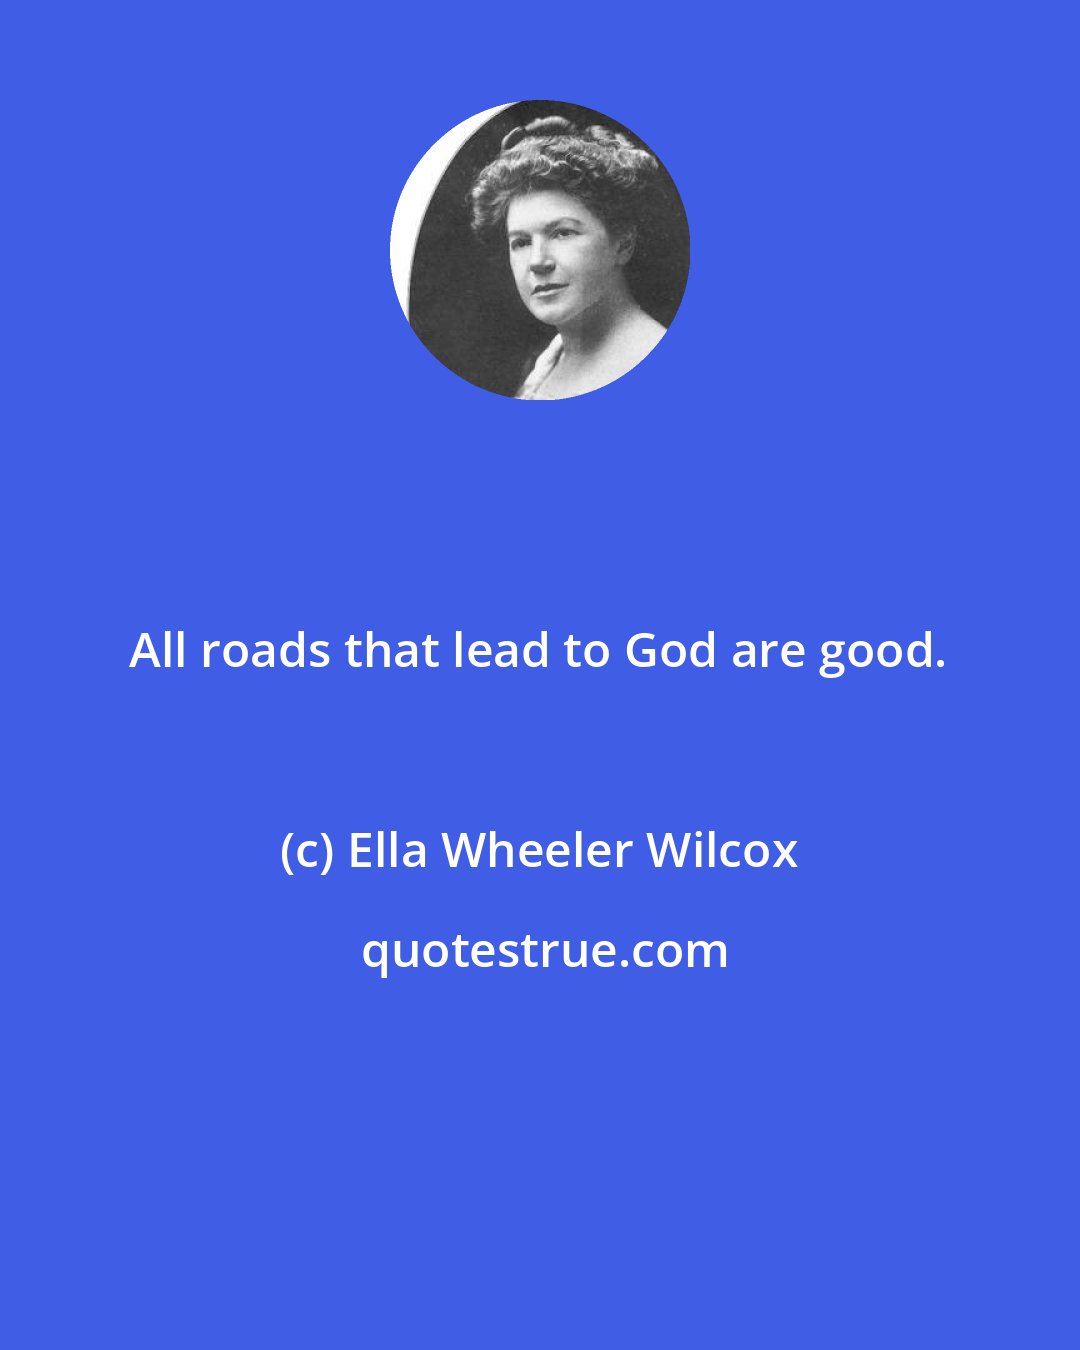 Ella Wheeler Wilcox: All roads that lead to God are good.